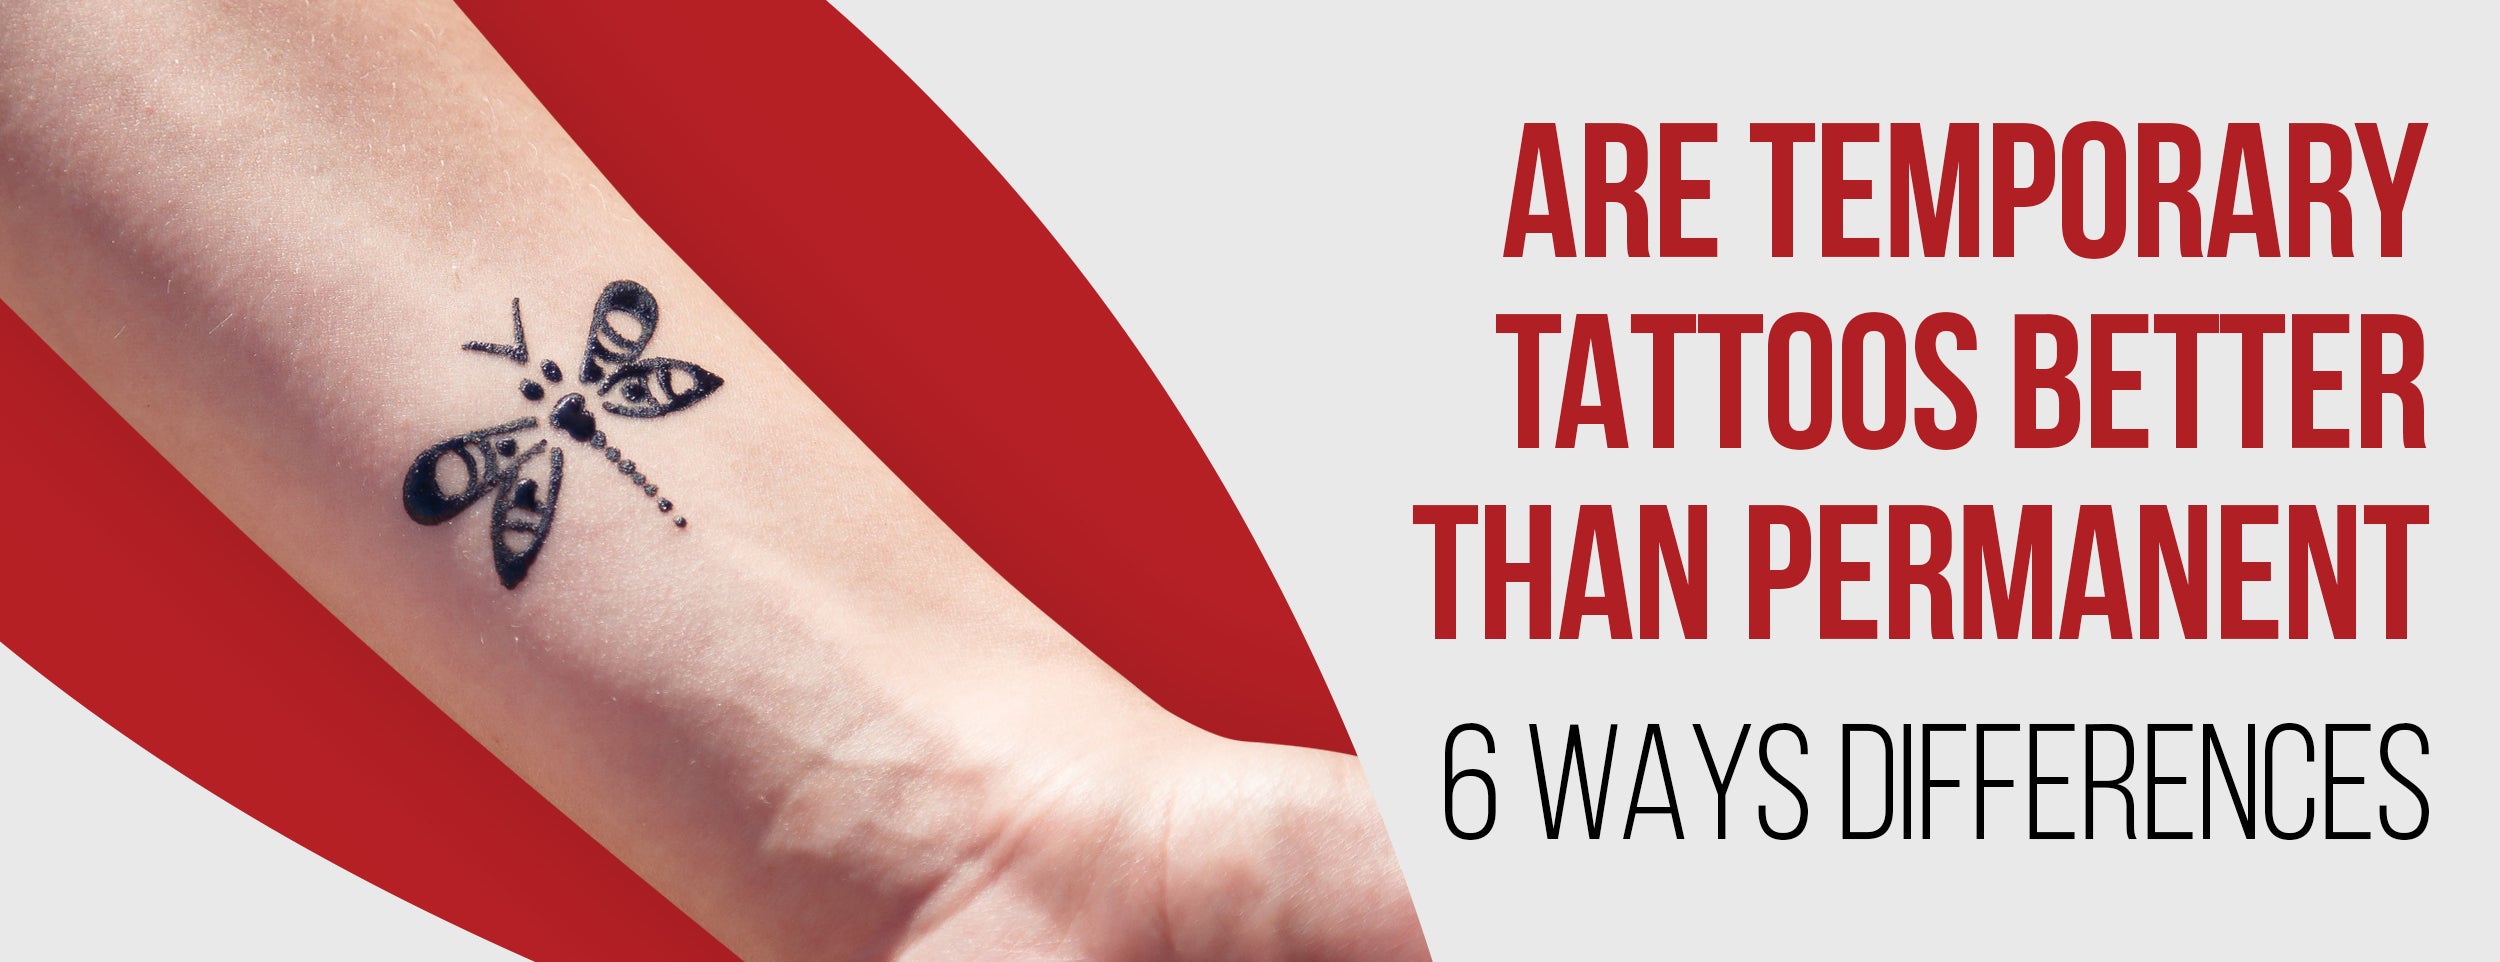 6 factors to consider before choosing a temporary tattoo over a permanent one